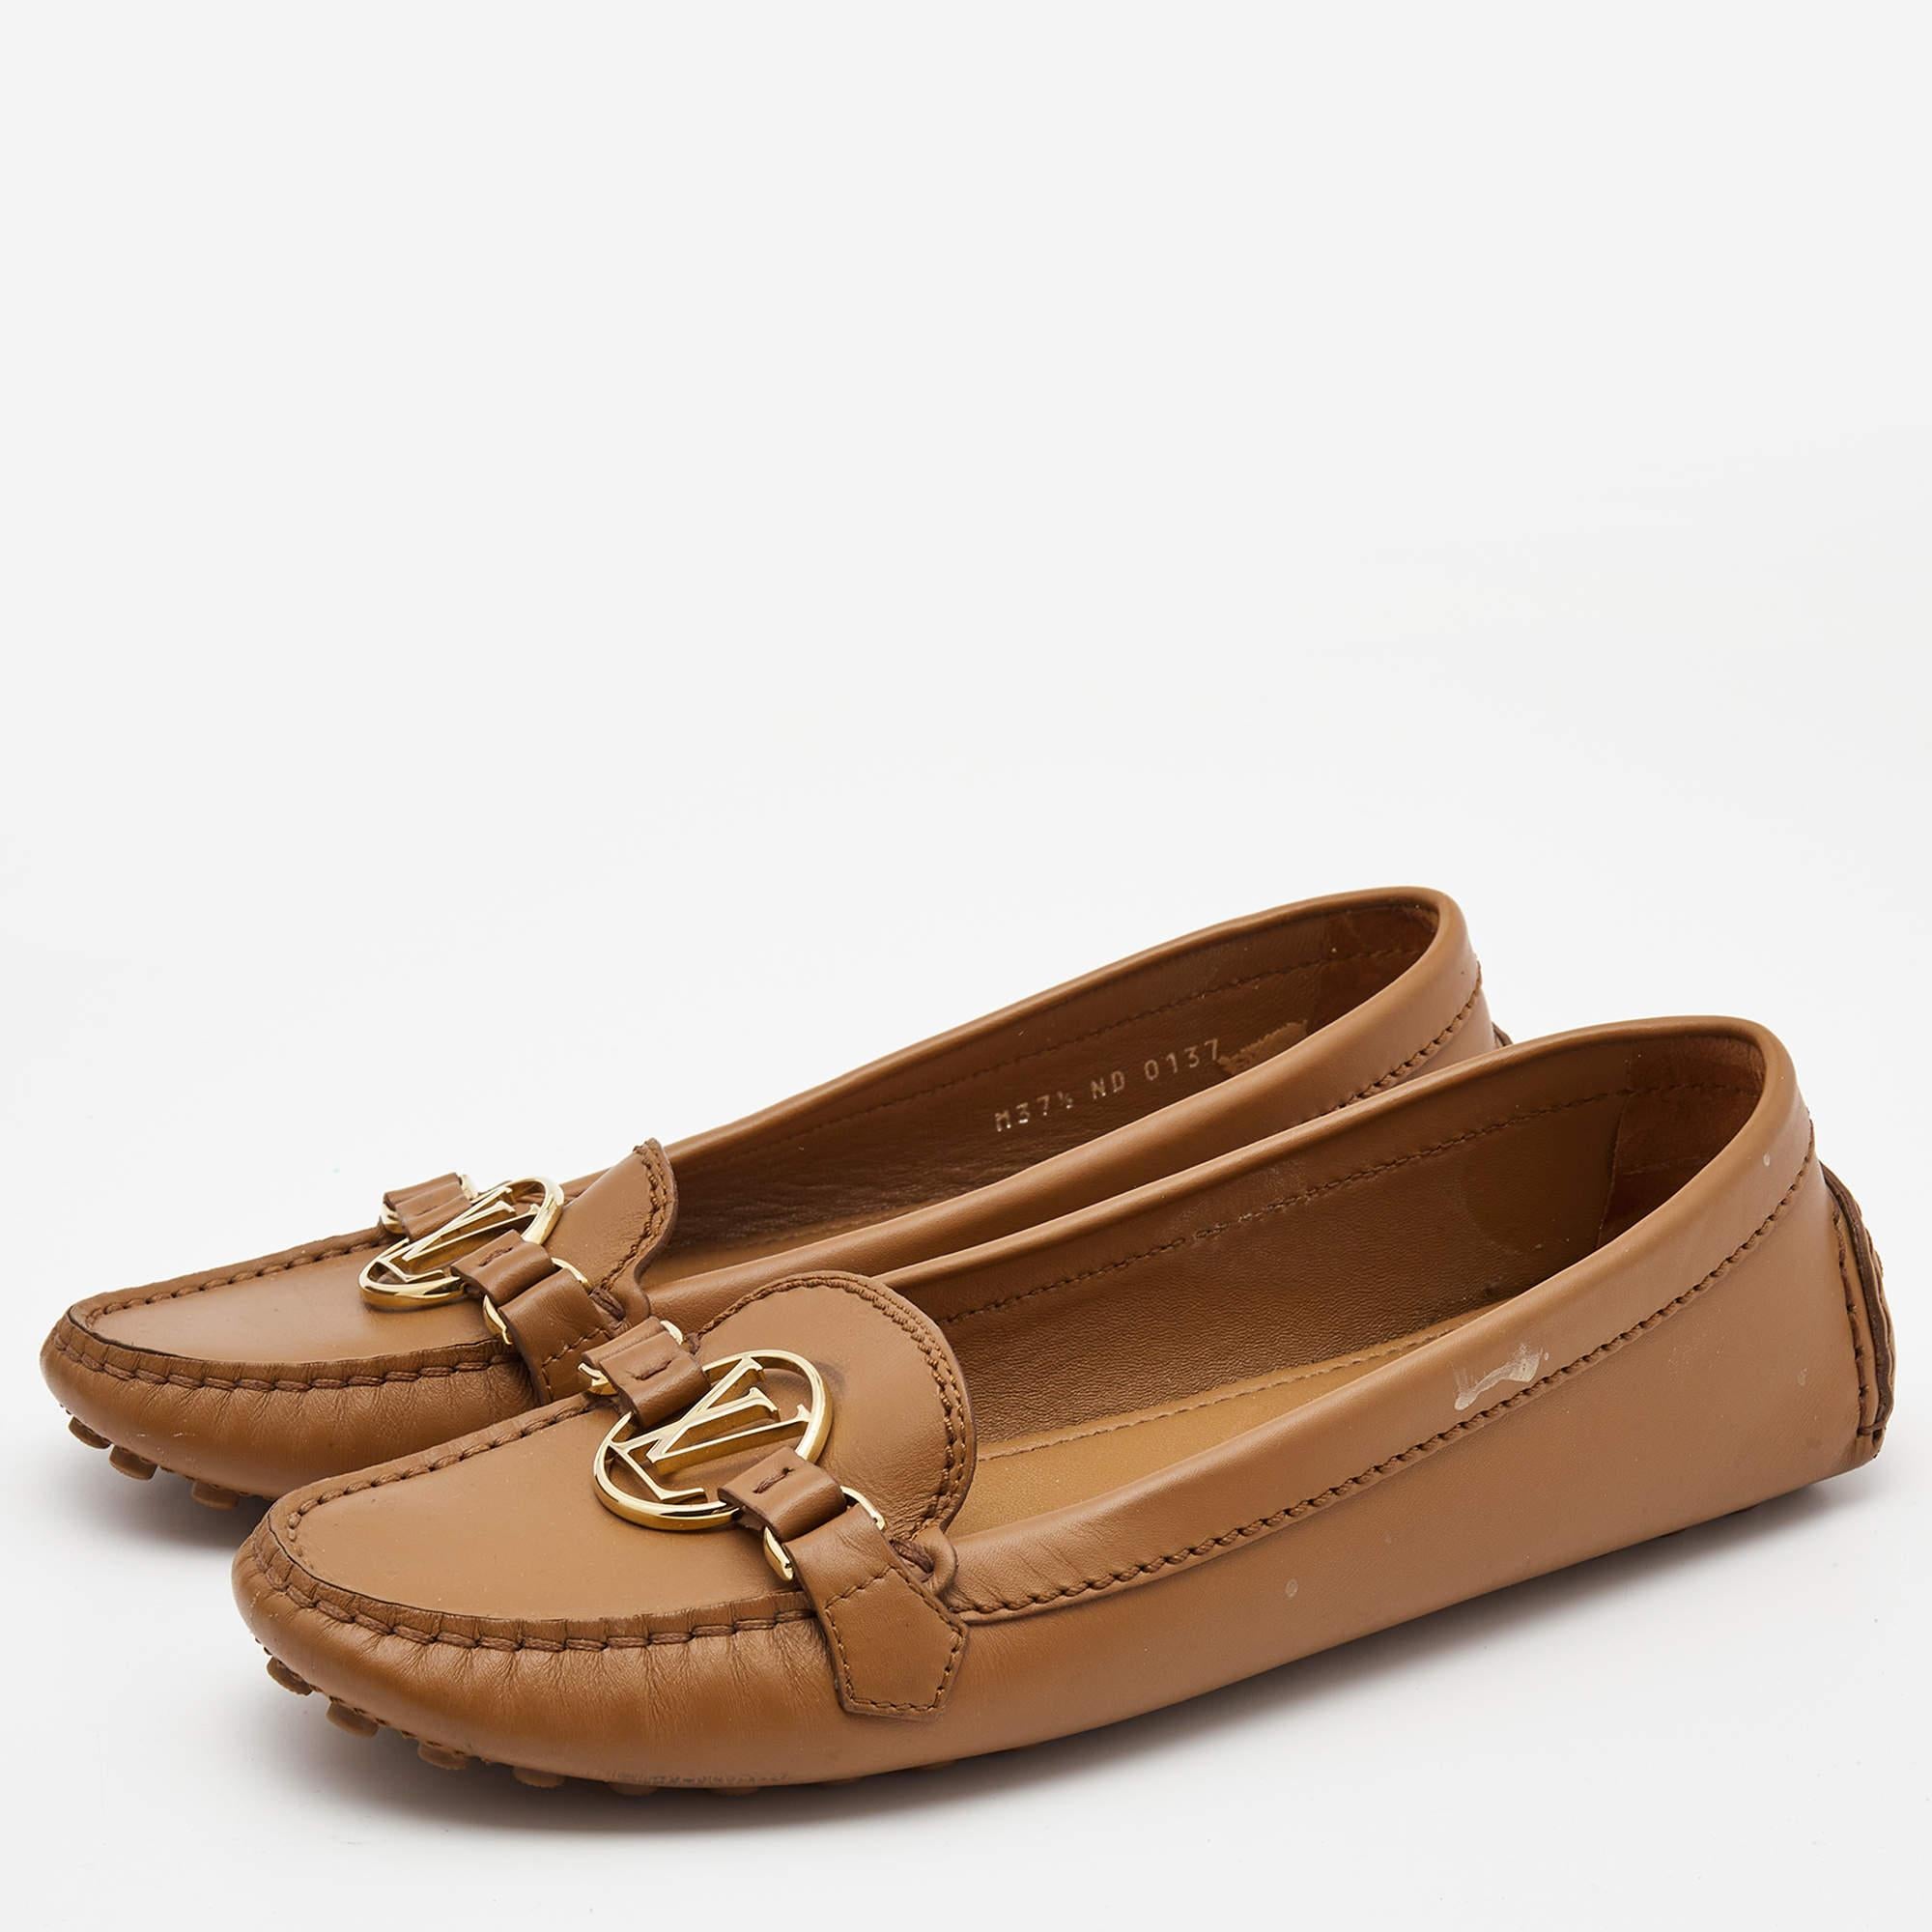 Louis Vuitton Brown Leather Dauphine Loafers Size 37.5 In Good Condition For Sale In Dubai, Al Qouz 2